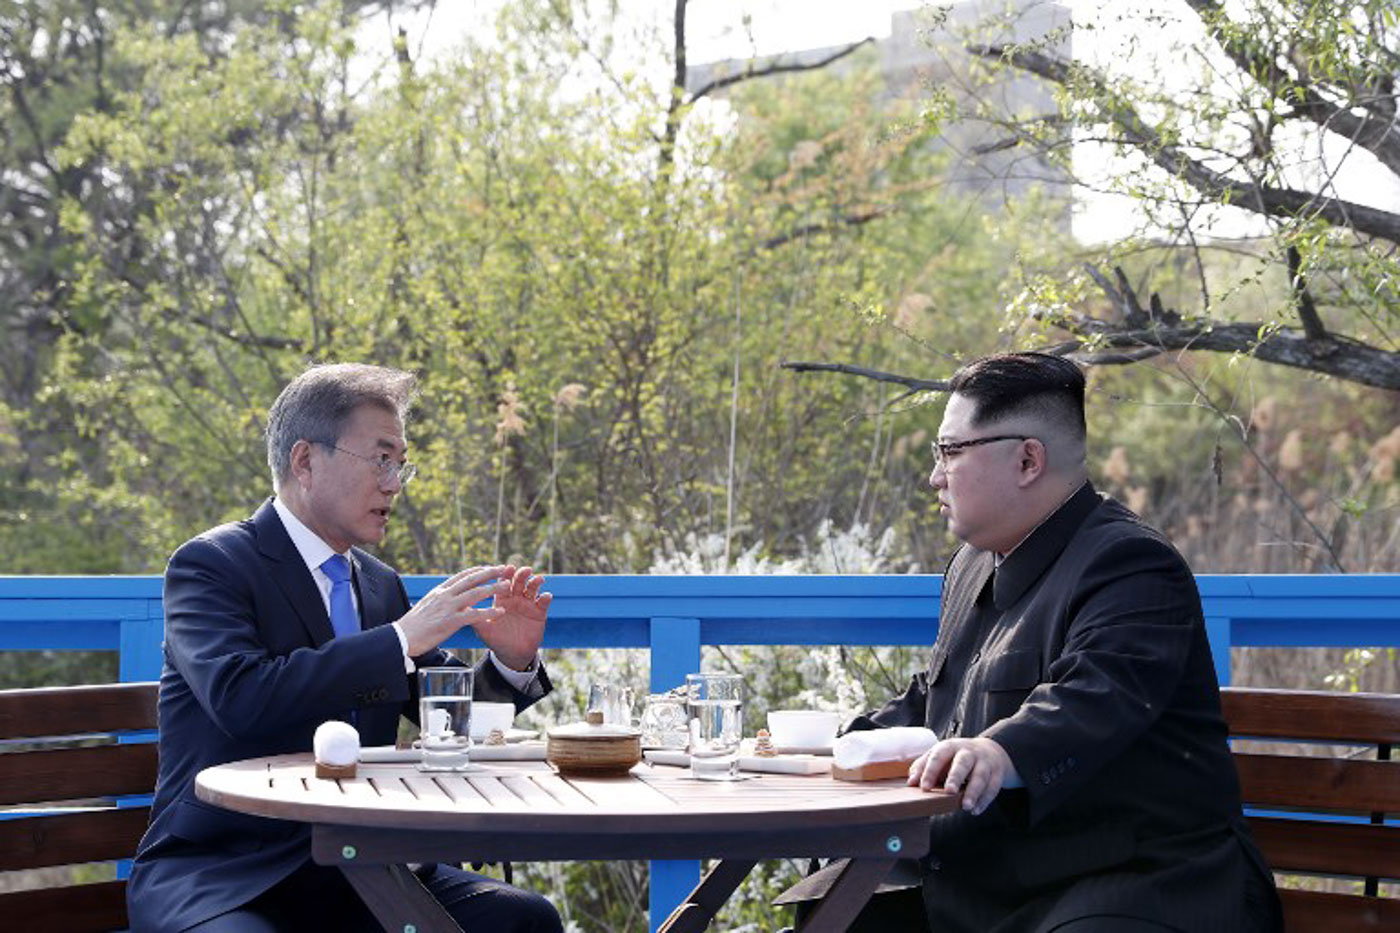 DISCUSSIONS. North Korea's leader Kim Jong-Un (R) talks with South Korea's President Moon Jae-in (L) at a bench on a bridge next to the military demarcation line at the truce village of Panmunjom on April 27, 2018. AFP PHOTO / Korea Summit Press Pool 